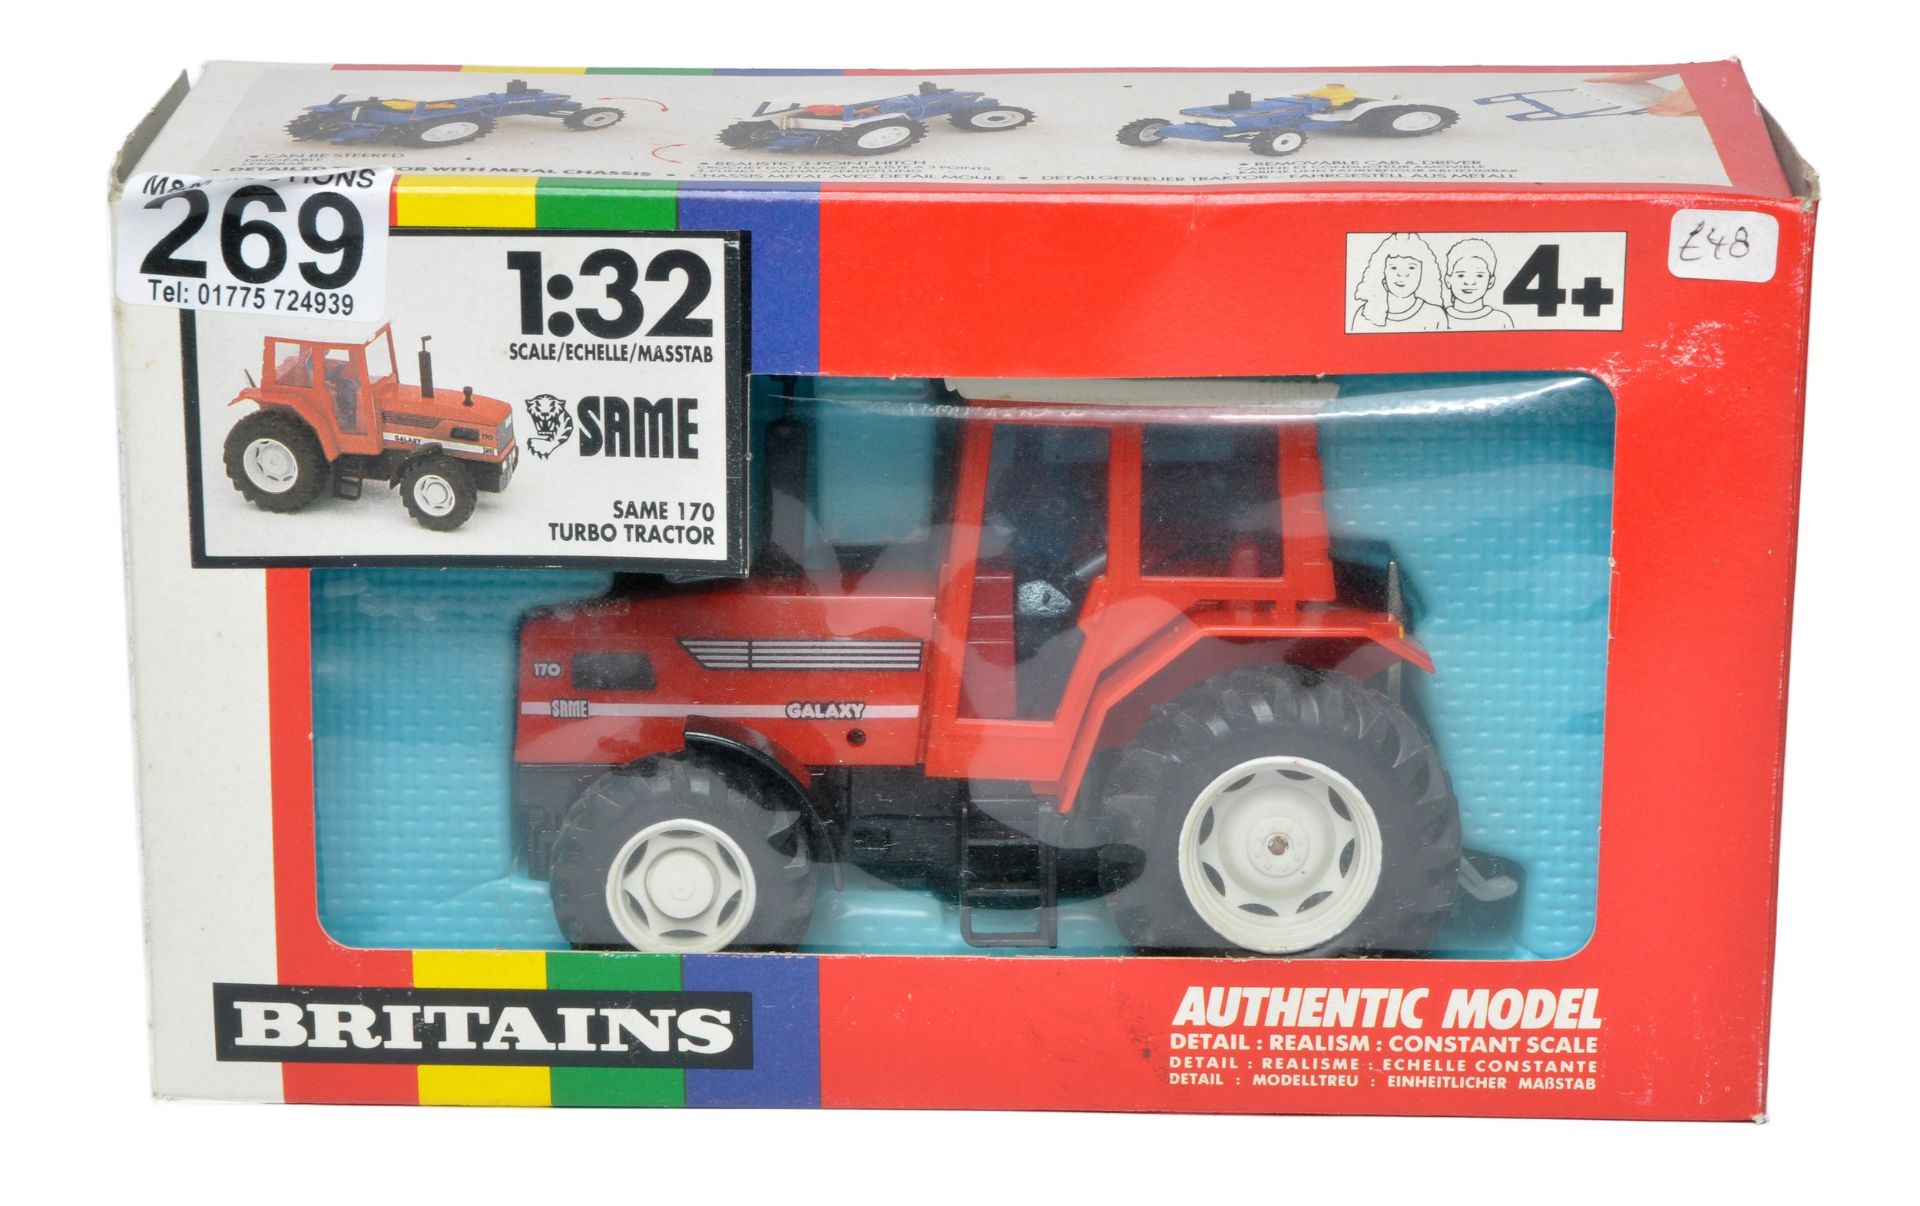 Britains Farm 1/32 diecast model issue comprising No. 9593 SAME 170 Tractor. Very good to